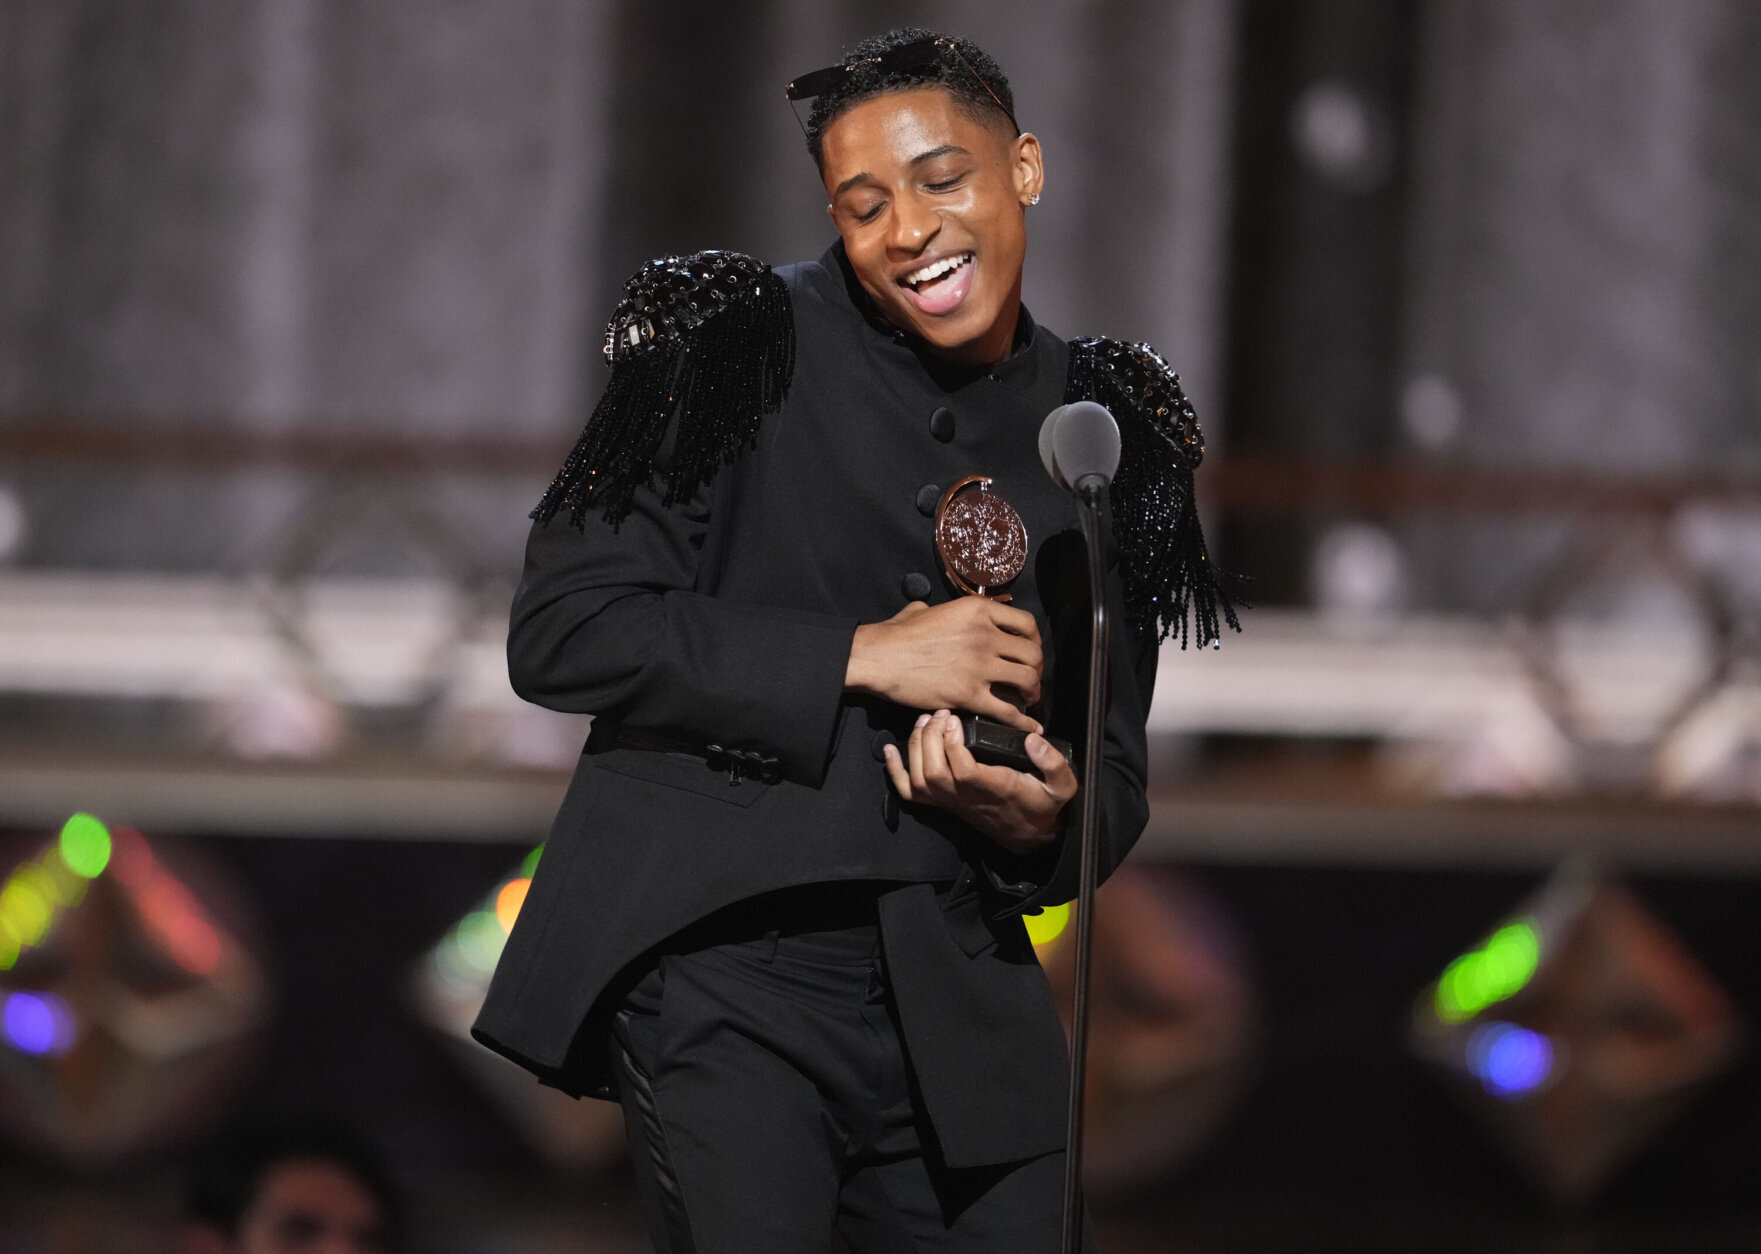 Myles Frost accepts the award for best leading actor in a musical for "MJ" at the 75th annual Tony Awards on Sunday, June 12, 2022, at Radio City Music Hall in New York. (Photo by Charles Sykes/Invision/AP)